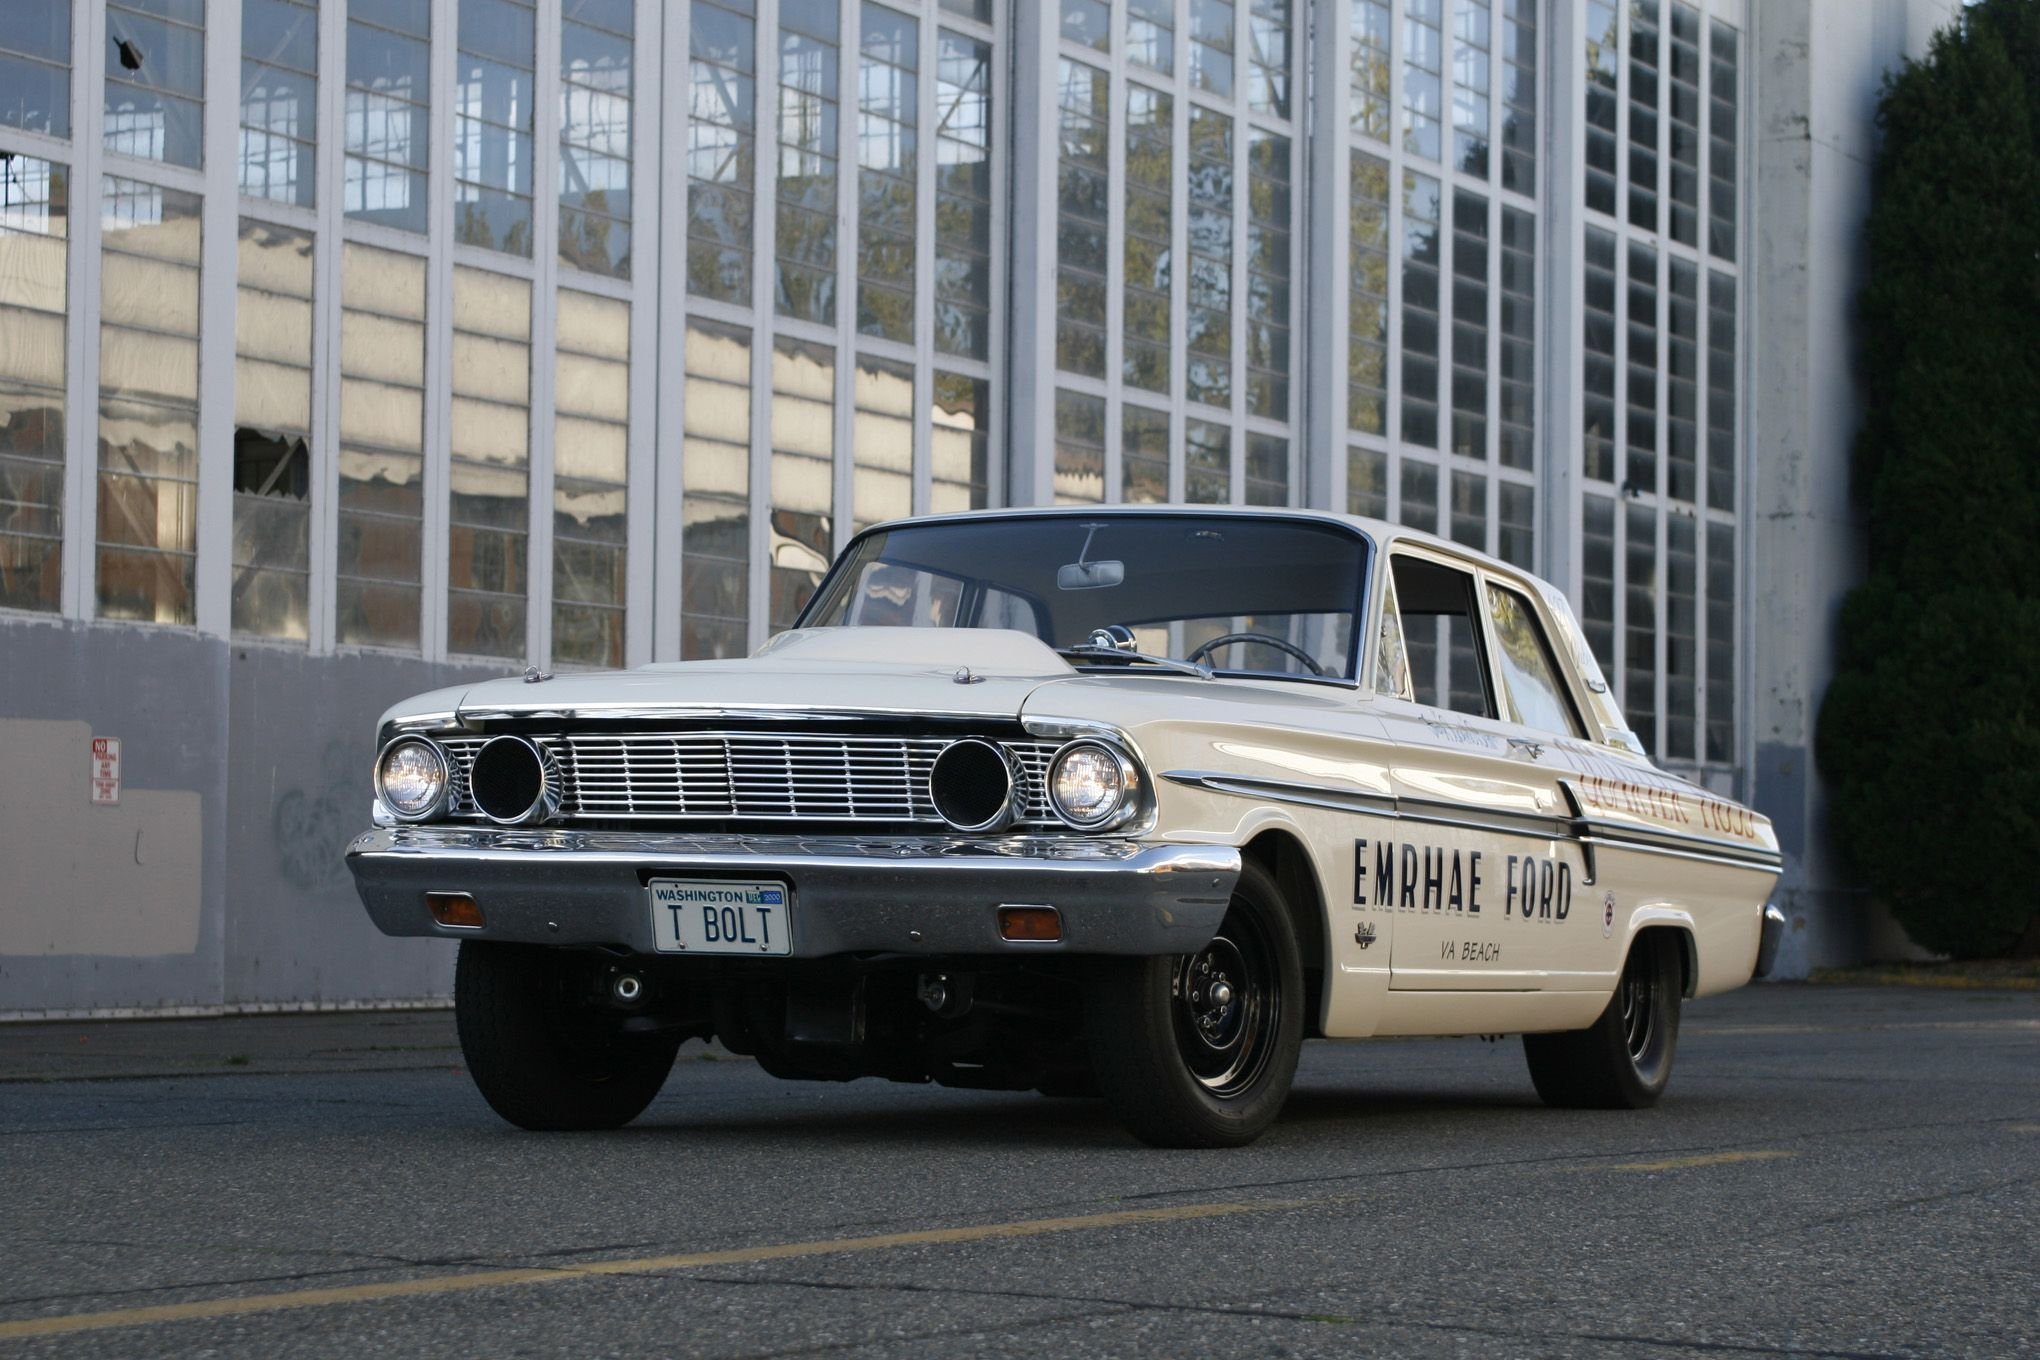 1964 Ford Thunderbolt Wallpapers